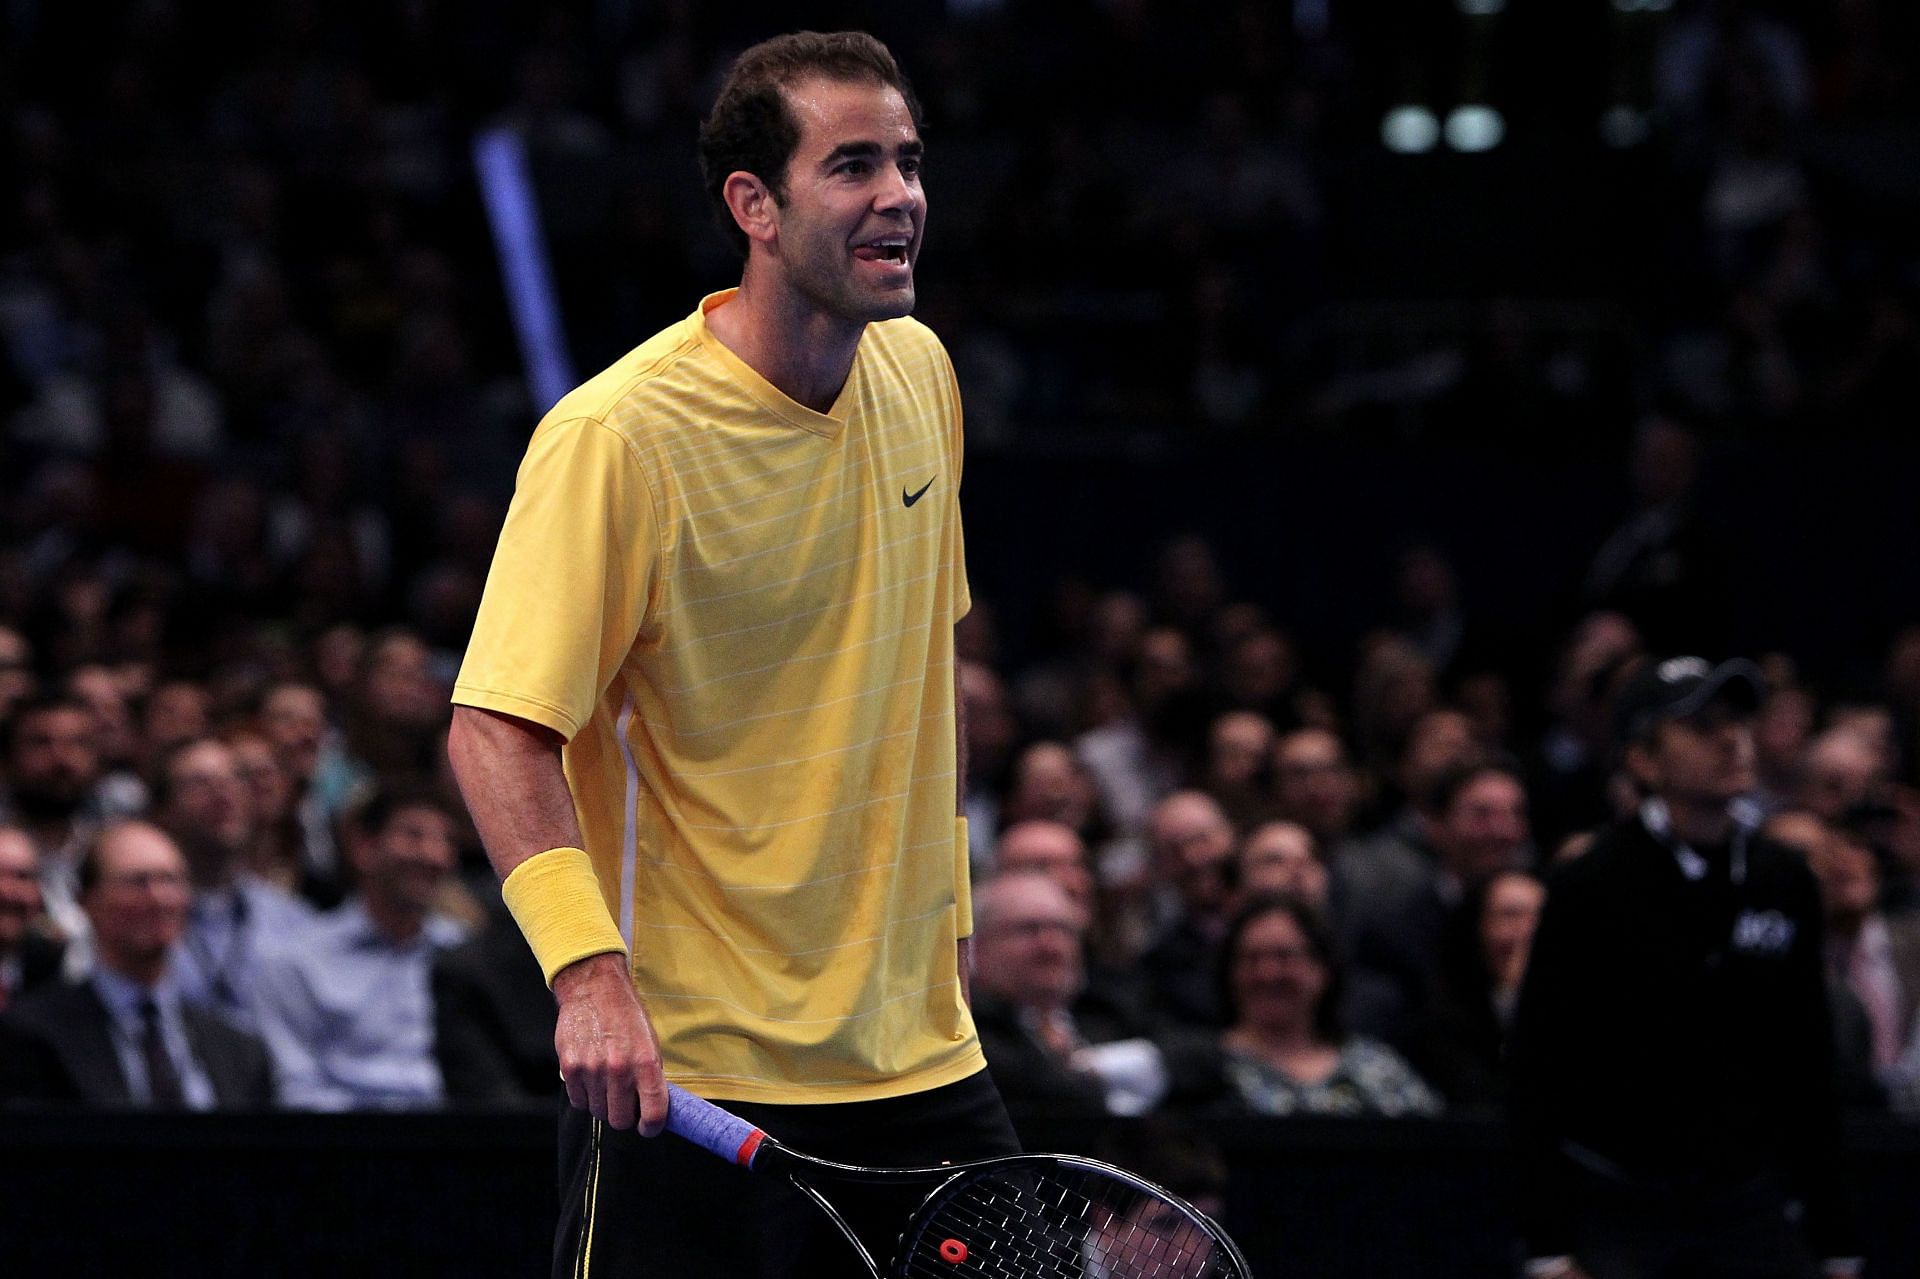 Marion Bartoli used Pete Sampras as an example for why players should be judged only on their tennis